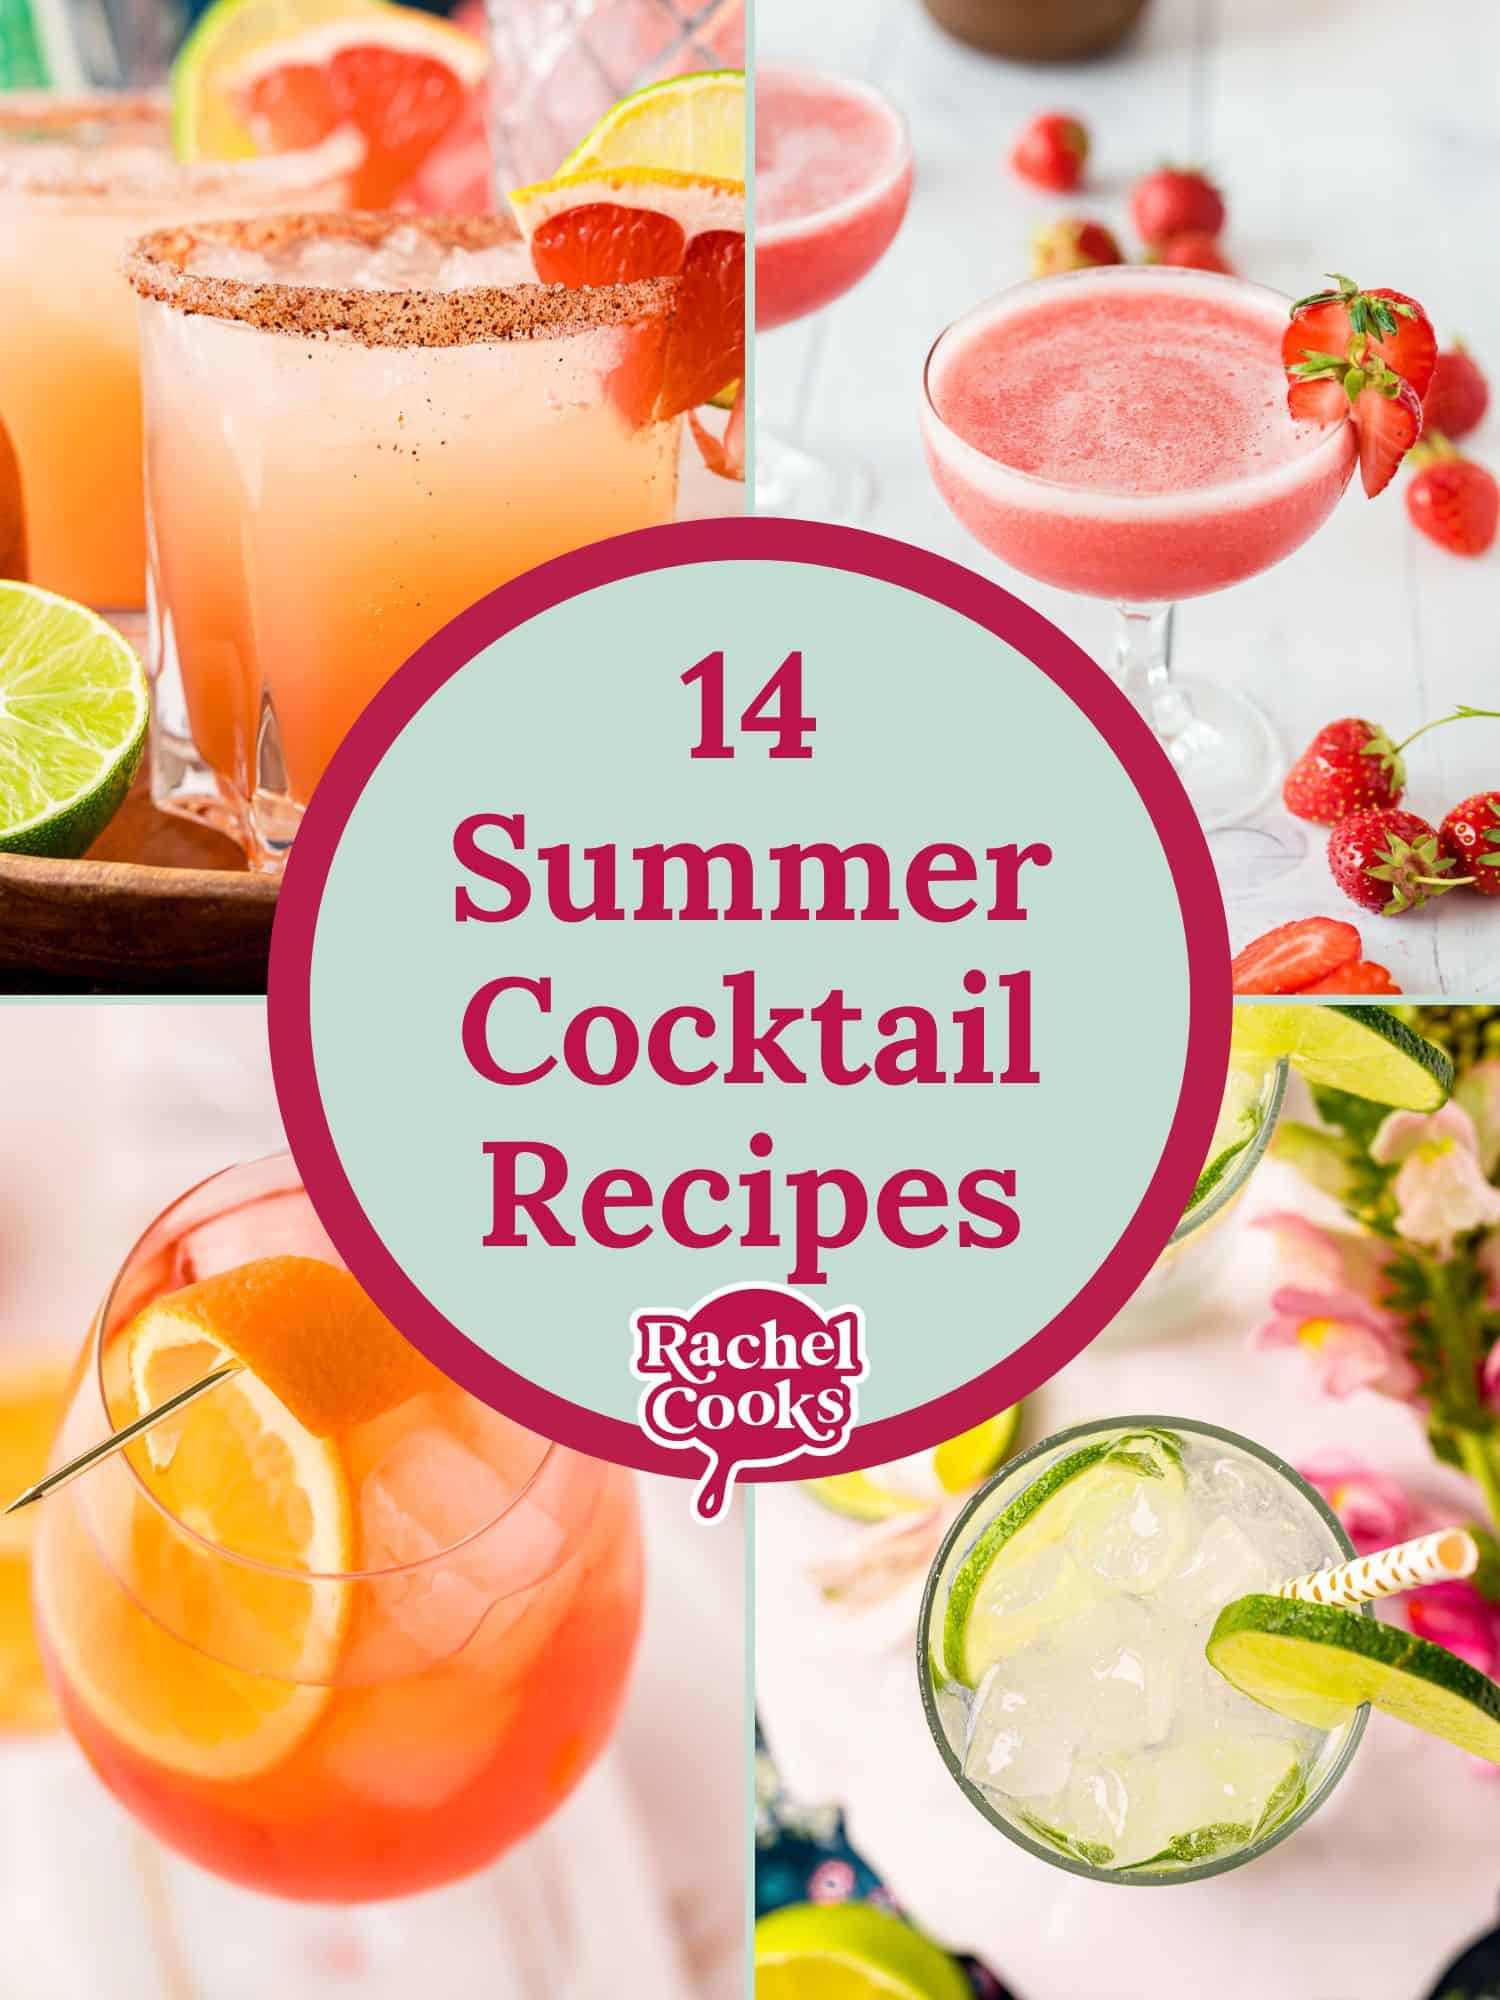 Summer cocktail recipes list graphic with text and photos.